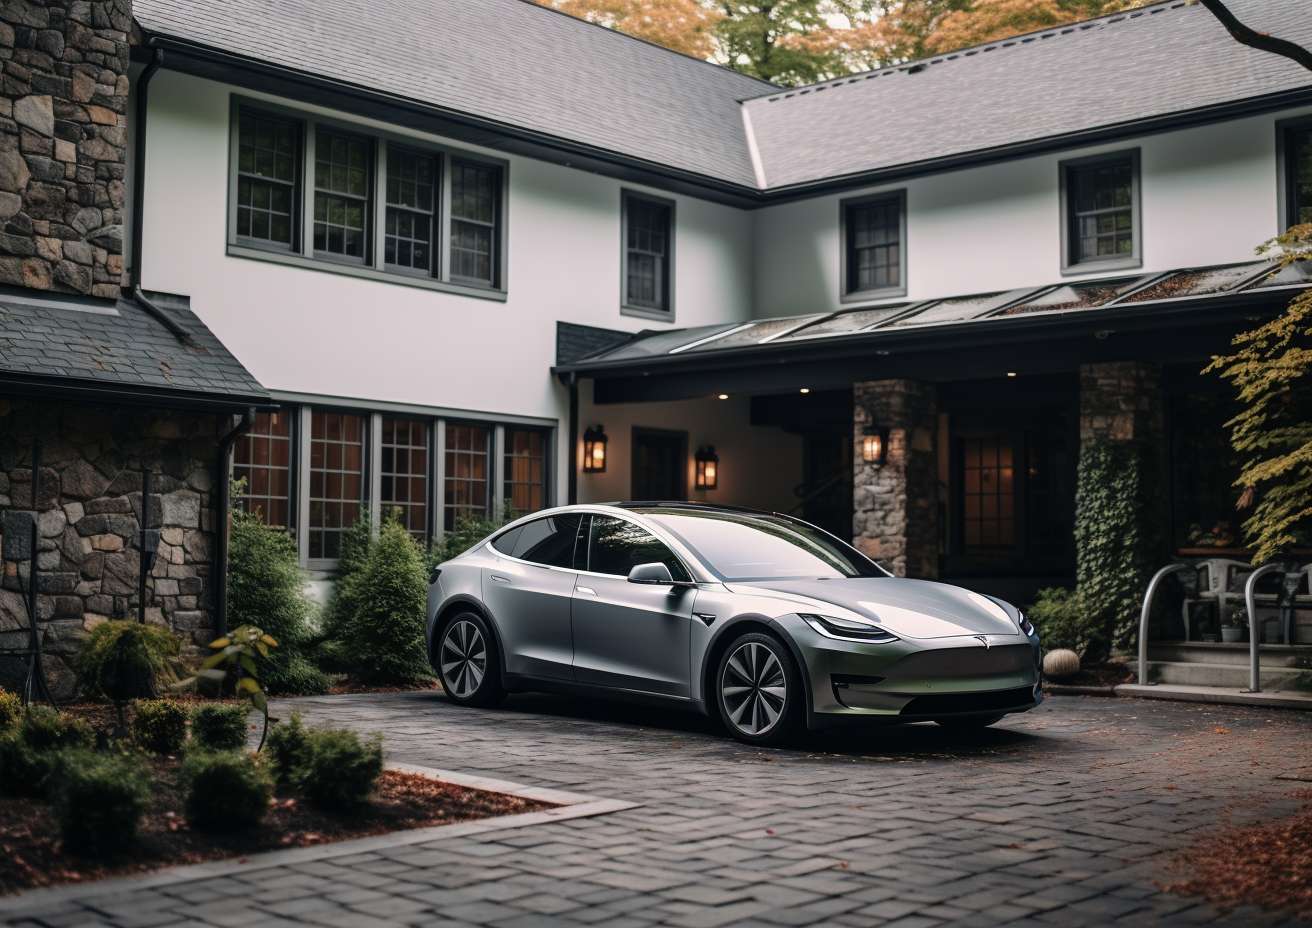 The Tesla Model 3 is parked in front of a stone house.